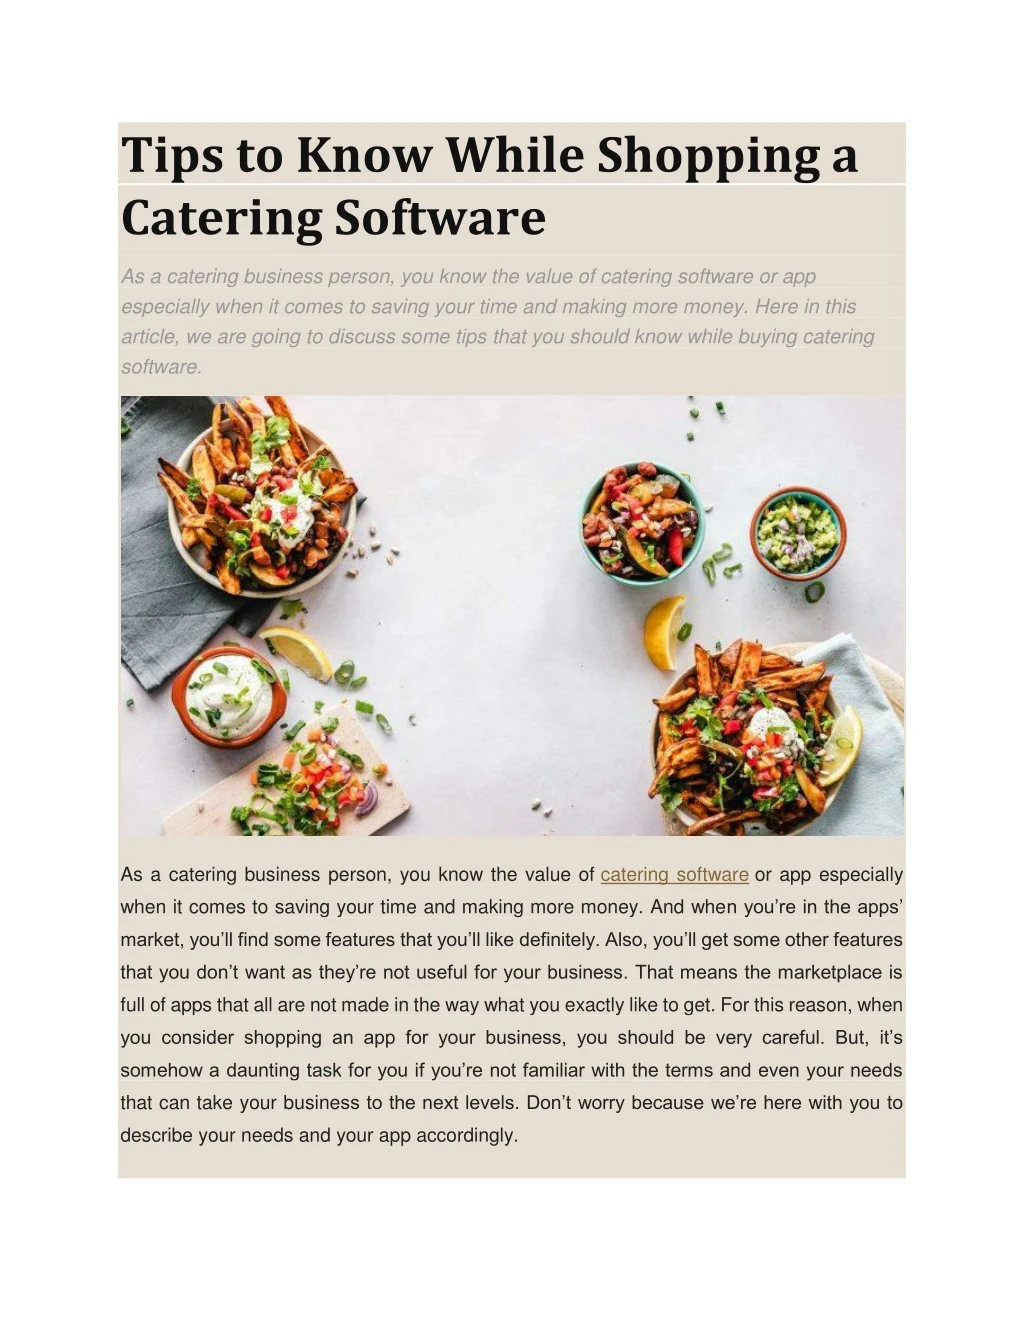 tips to know while shopping a catering software